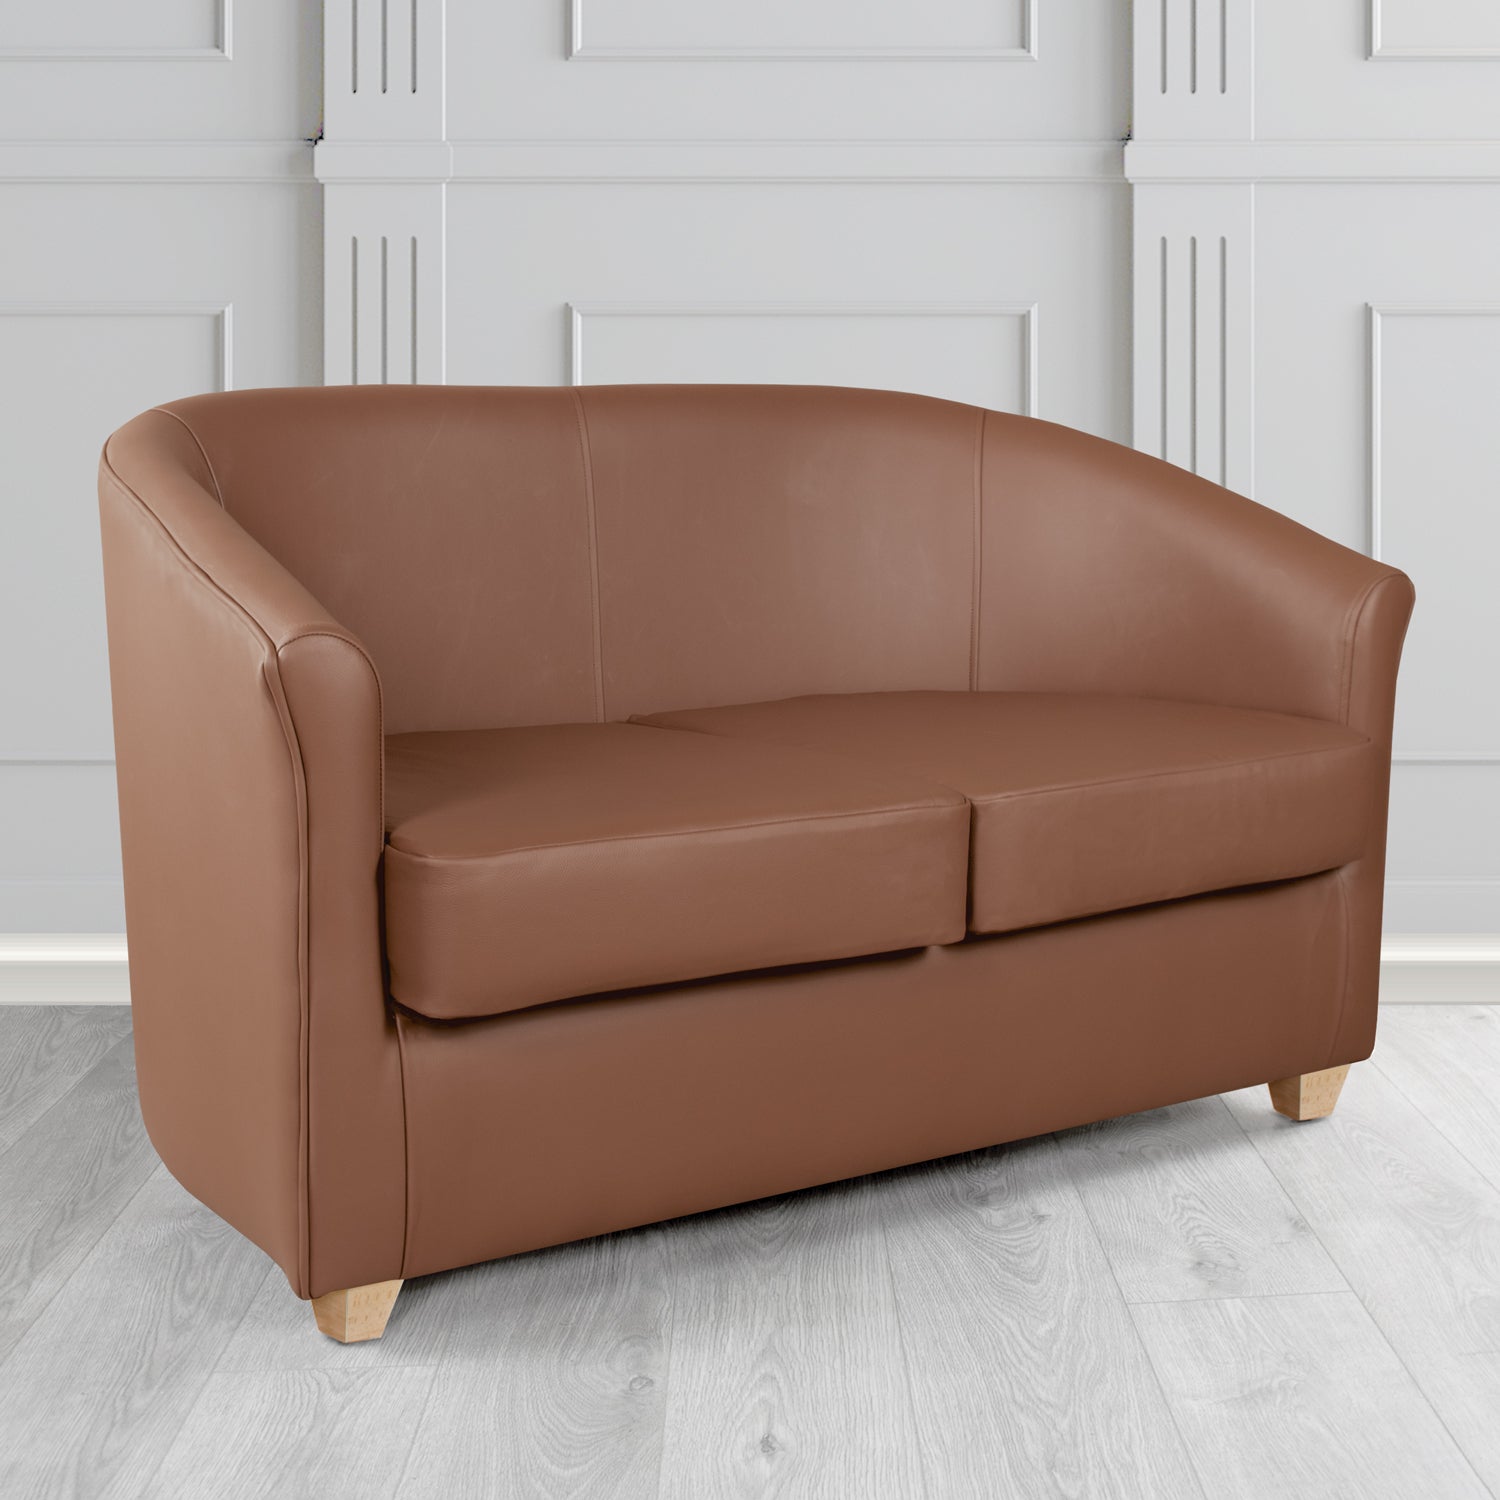 Cannes 2 Seater Tub Sofa in Just Colour Walnut Crib 5 Faux Leather - The Tub Chair Shop